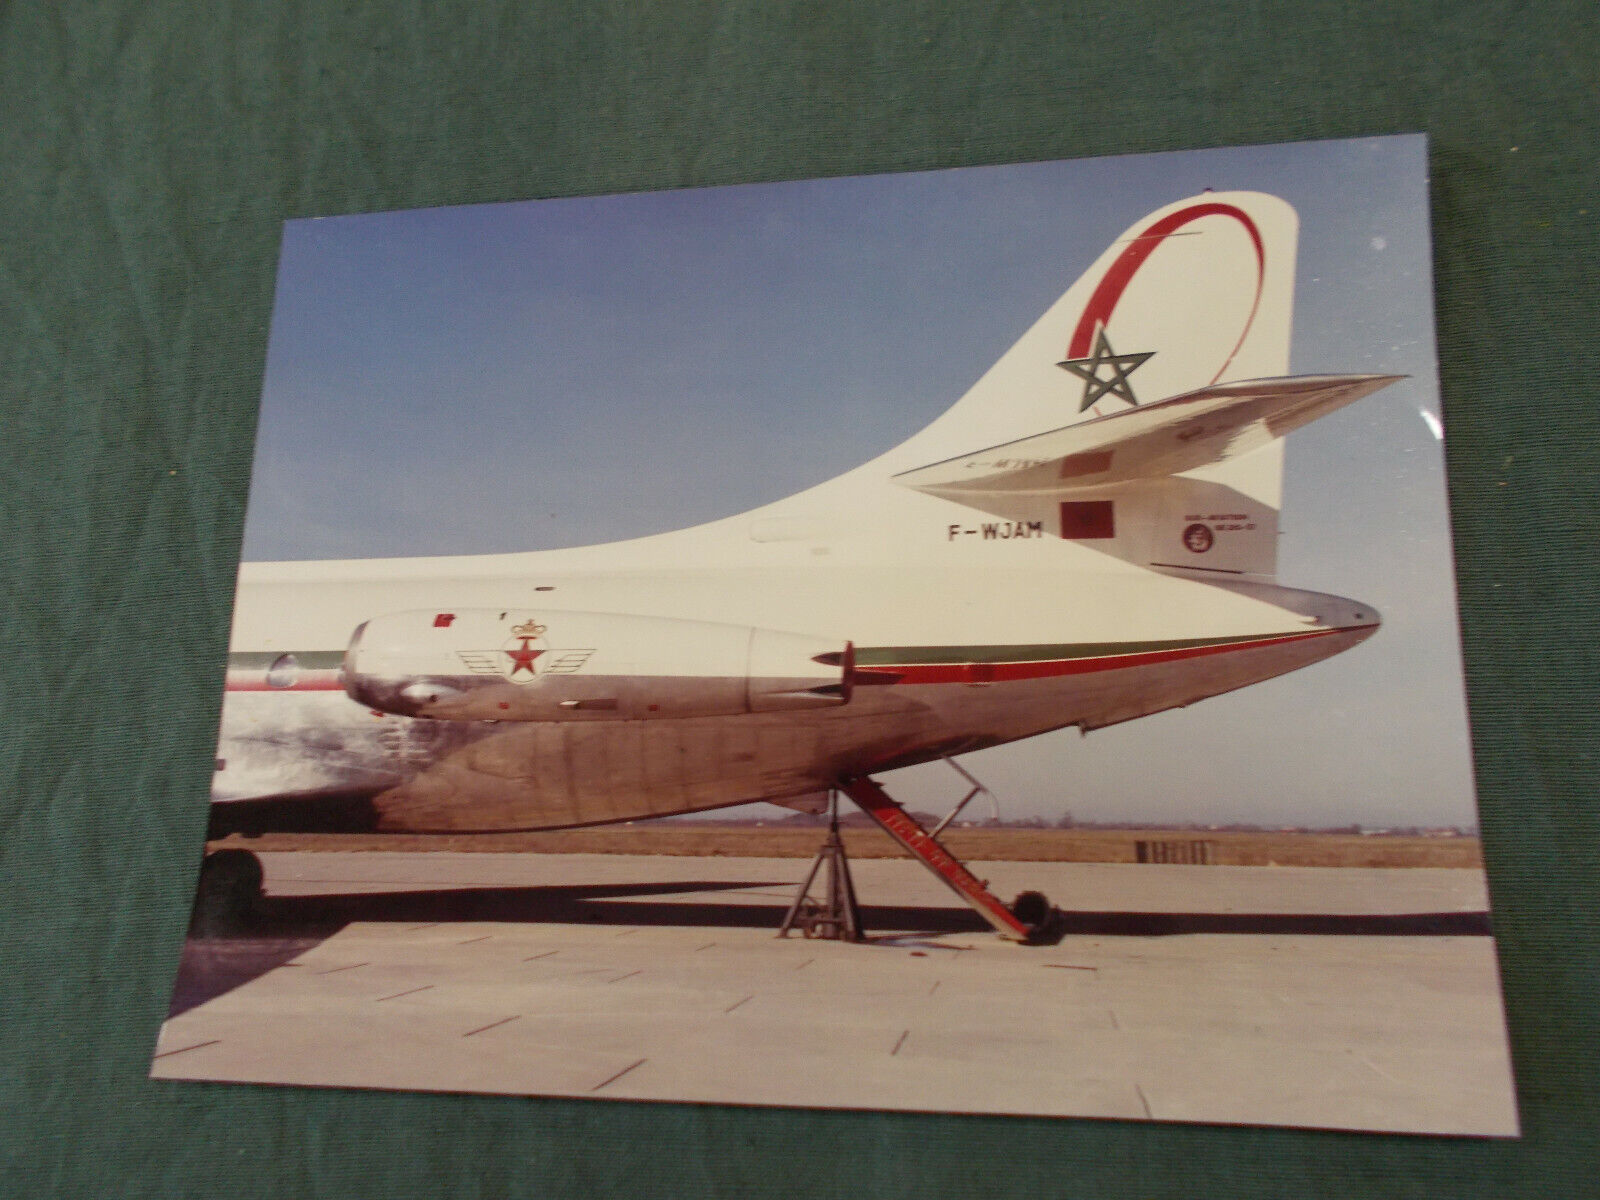 27 SE 210 Caravelle-Aviation-Photo 18/24-Collection.